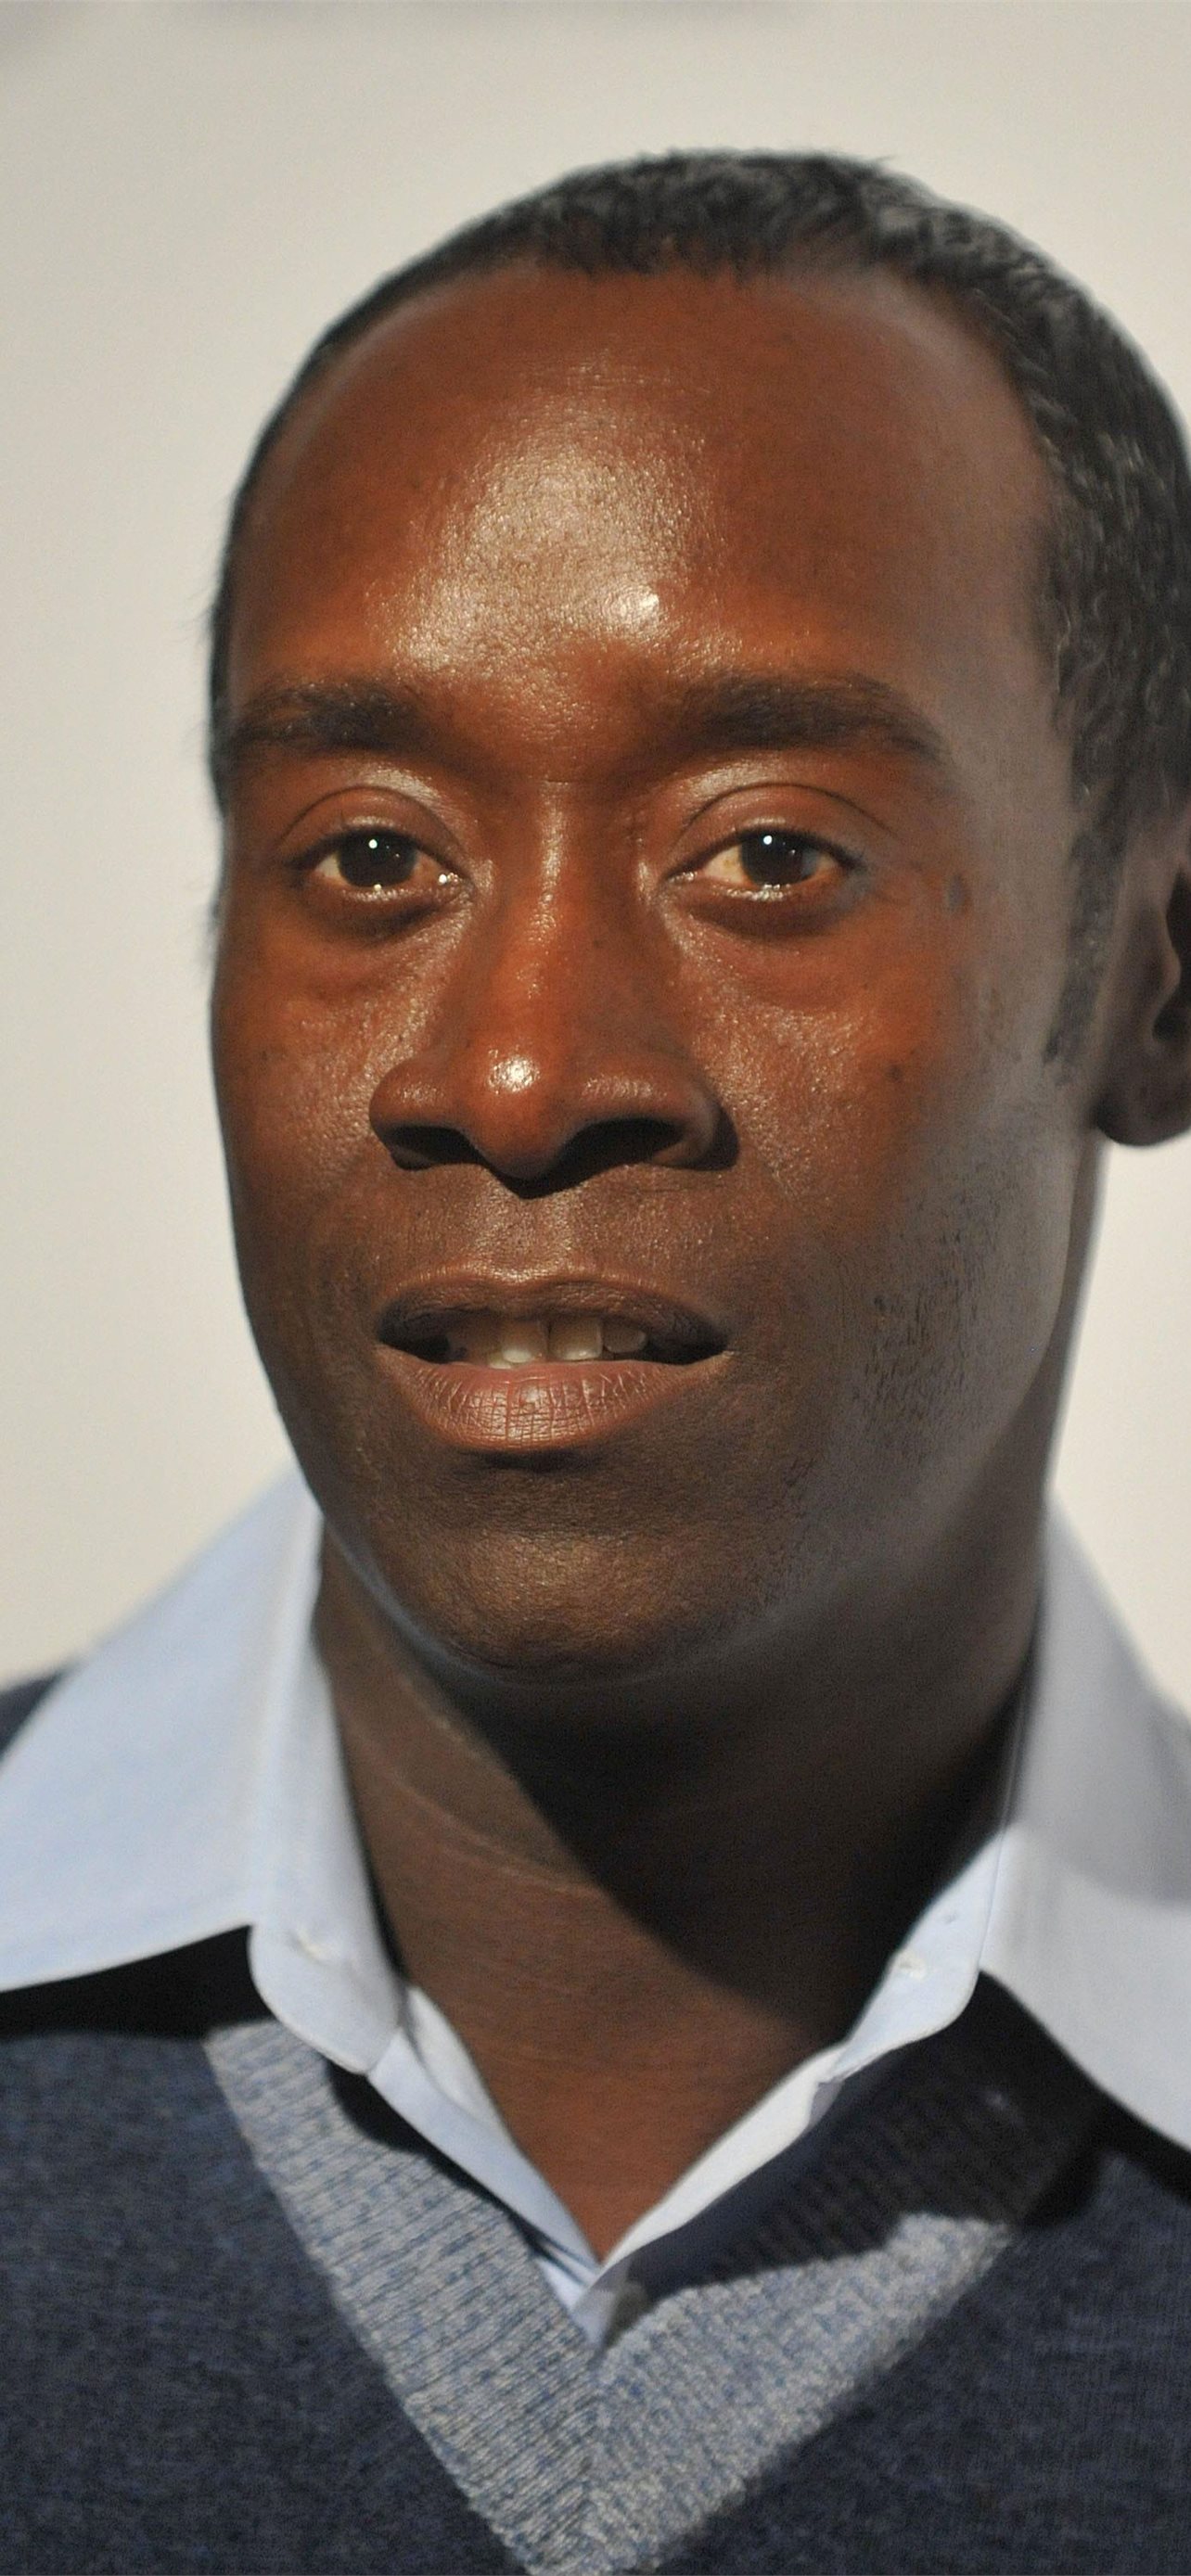 don cheadle iPhone Wallpapers Free Download